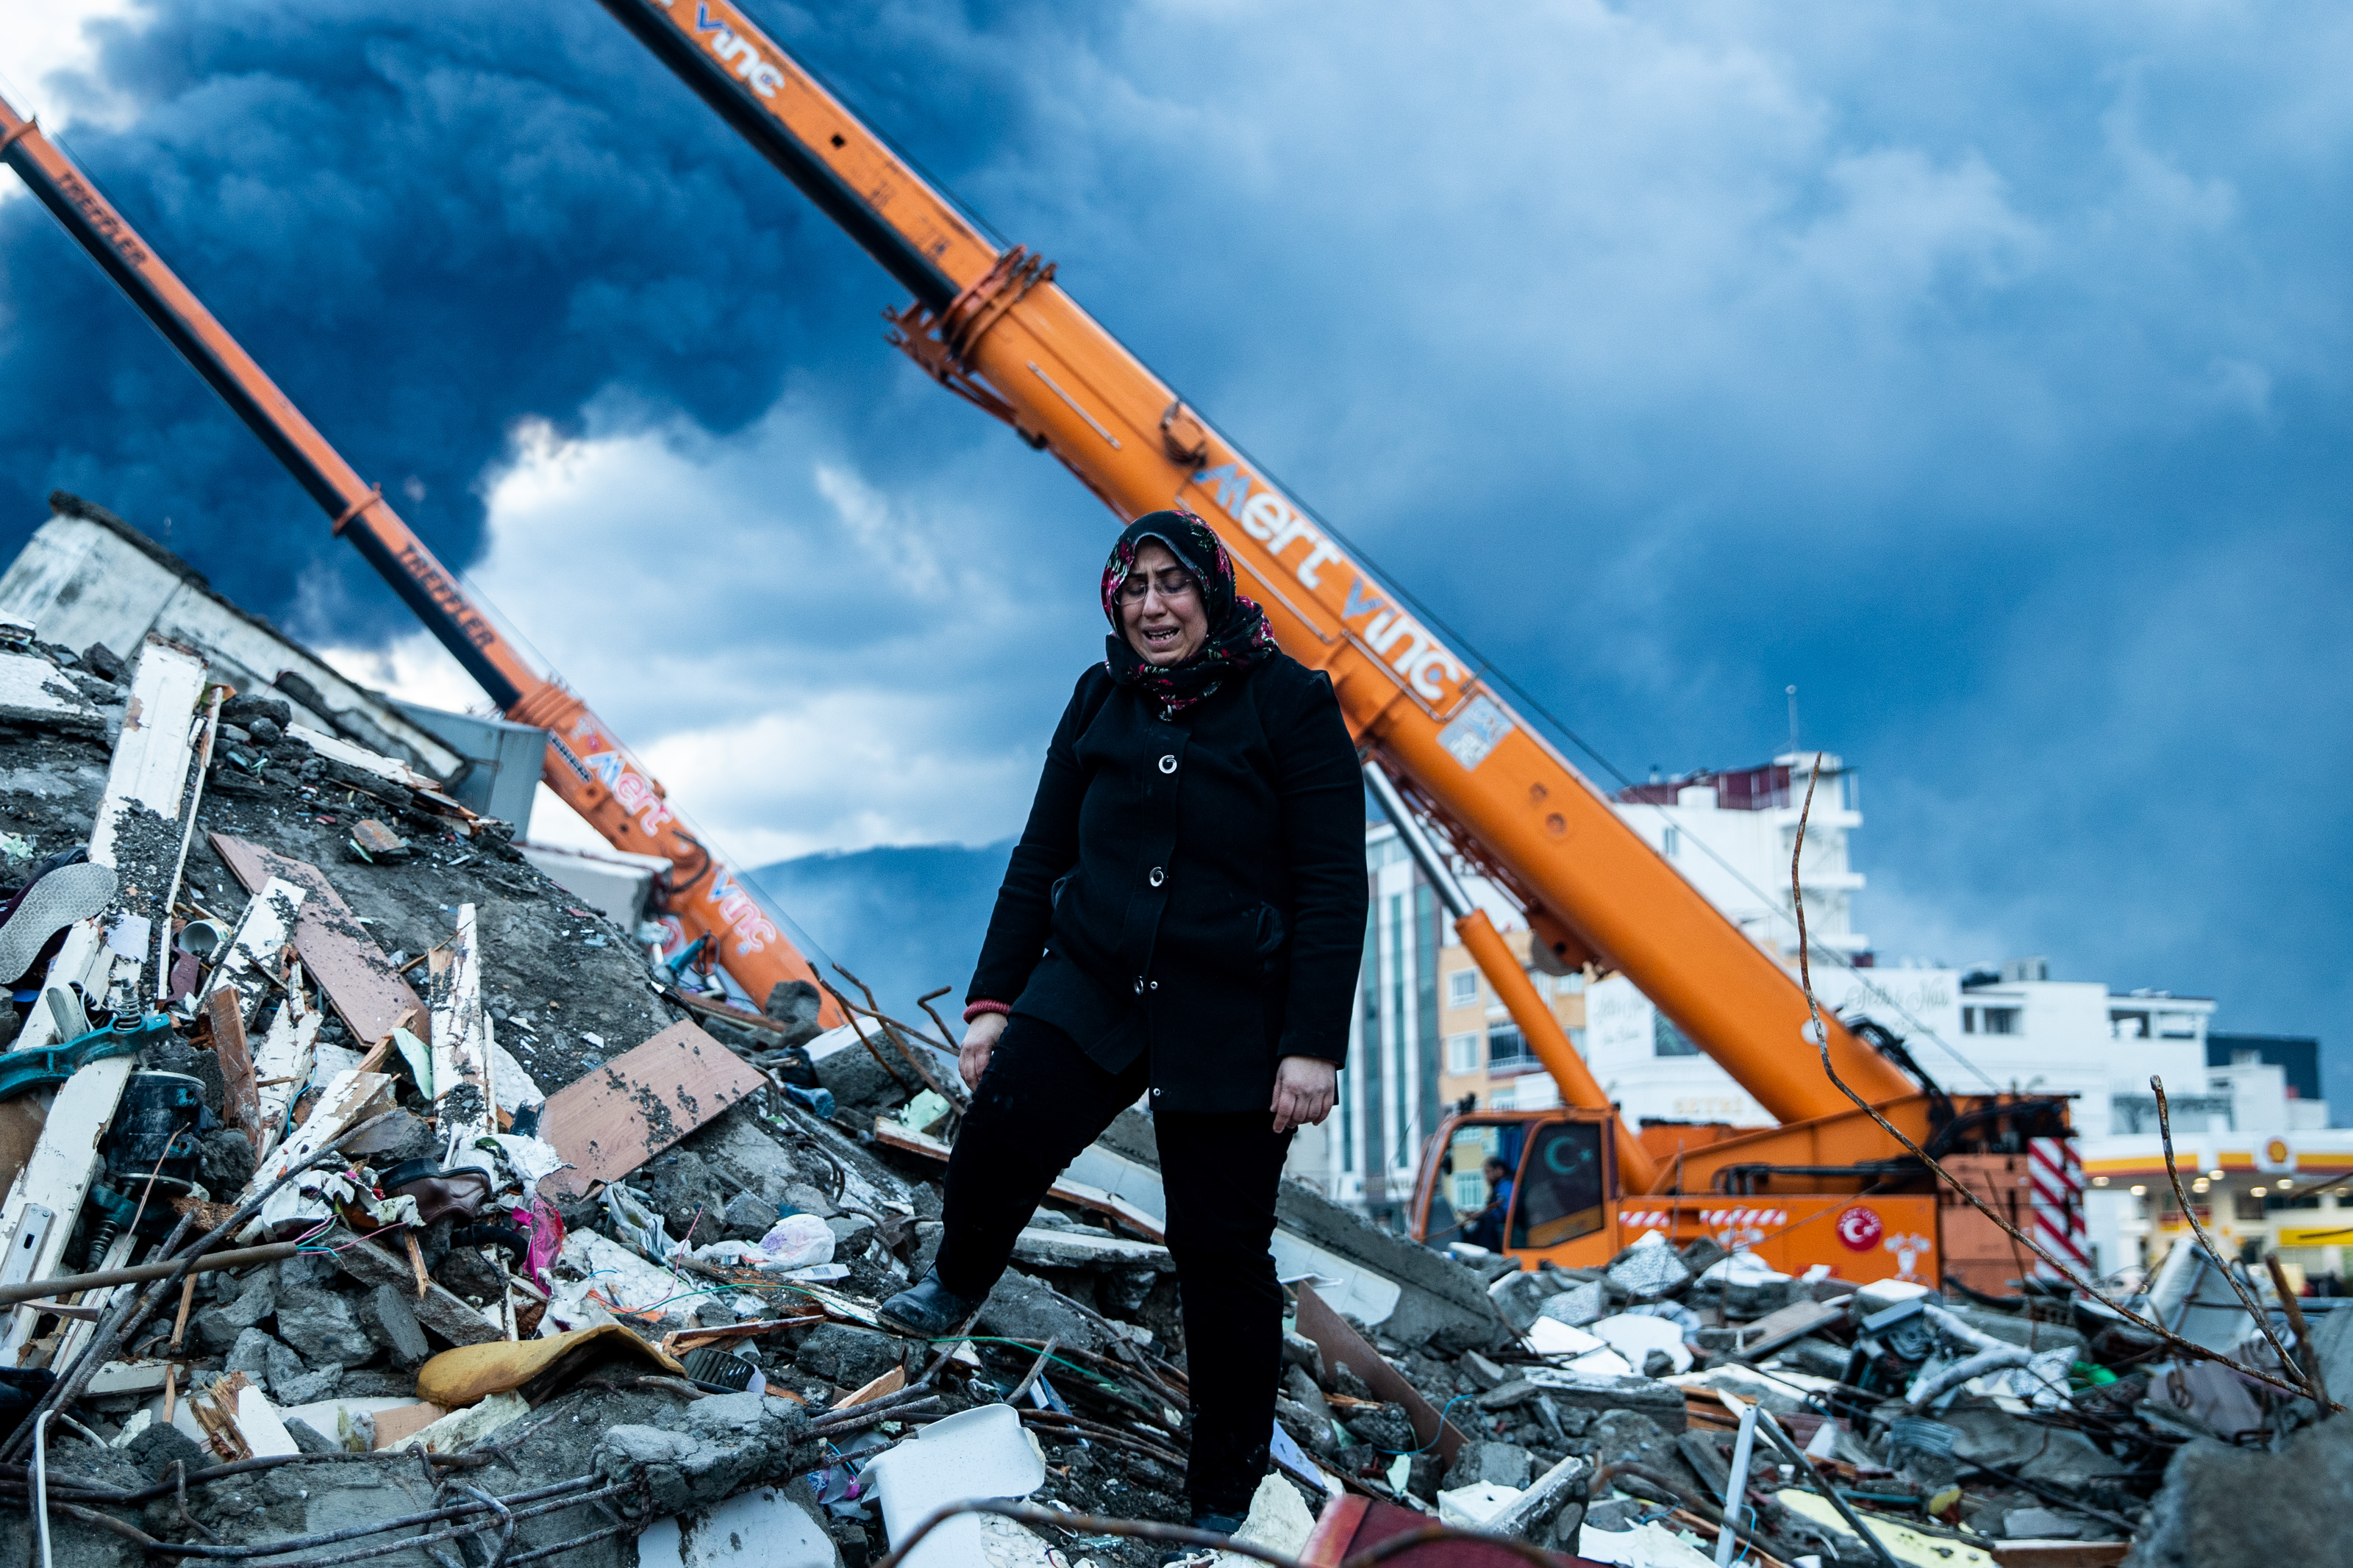 HATAY, TURKEY - FEBRUARY 07: A woman waits for news of her loved ones, believed to be trapped under collapsed building on February 07, 2023 in Iskenderun, Turkey. A 7.8-magnitude earthquake hit near Gaziantep, Turkey, in the early hours of Monday, followed by another 7.5-magnitude tremor just after midday. The quakes caused widespread destruction in southern Turkey and northern Syria and were felt in nearby countries. (Photo by Burak Kara/Getty Images)